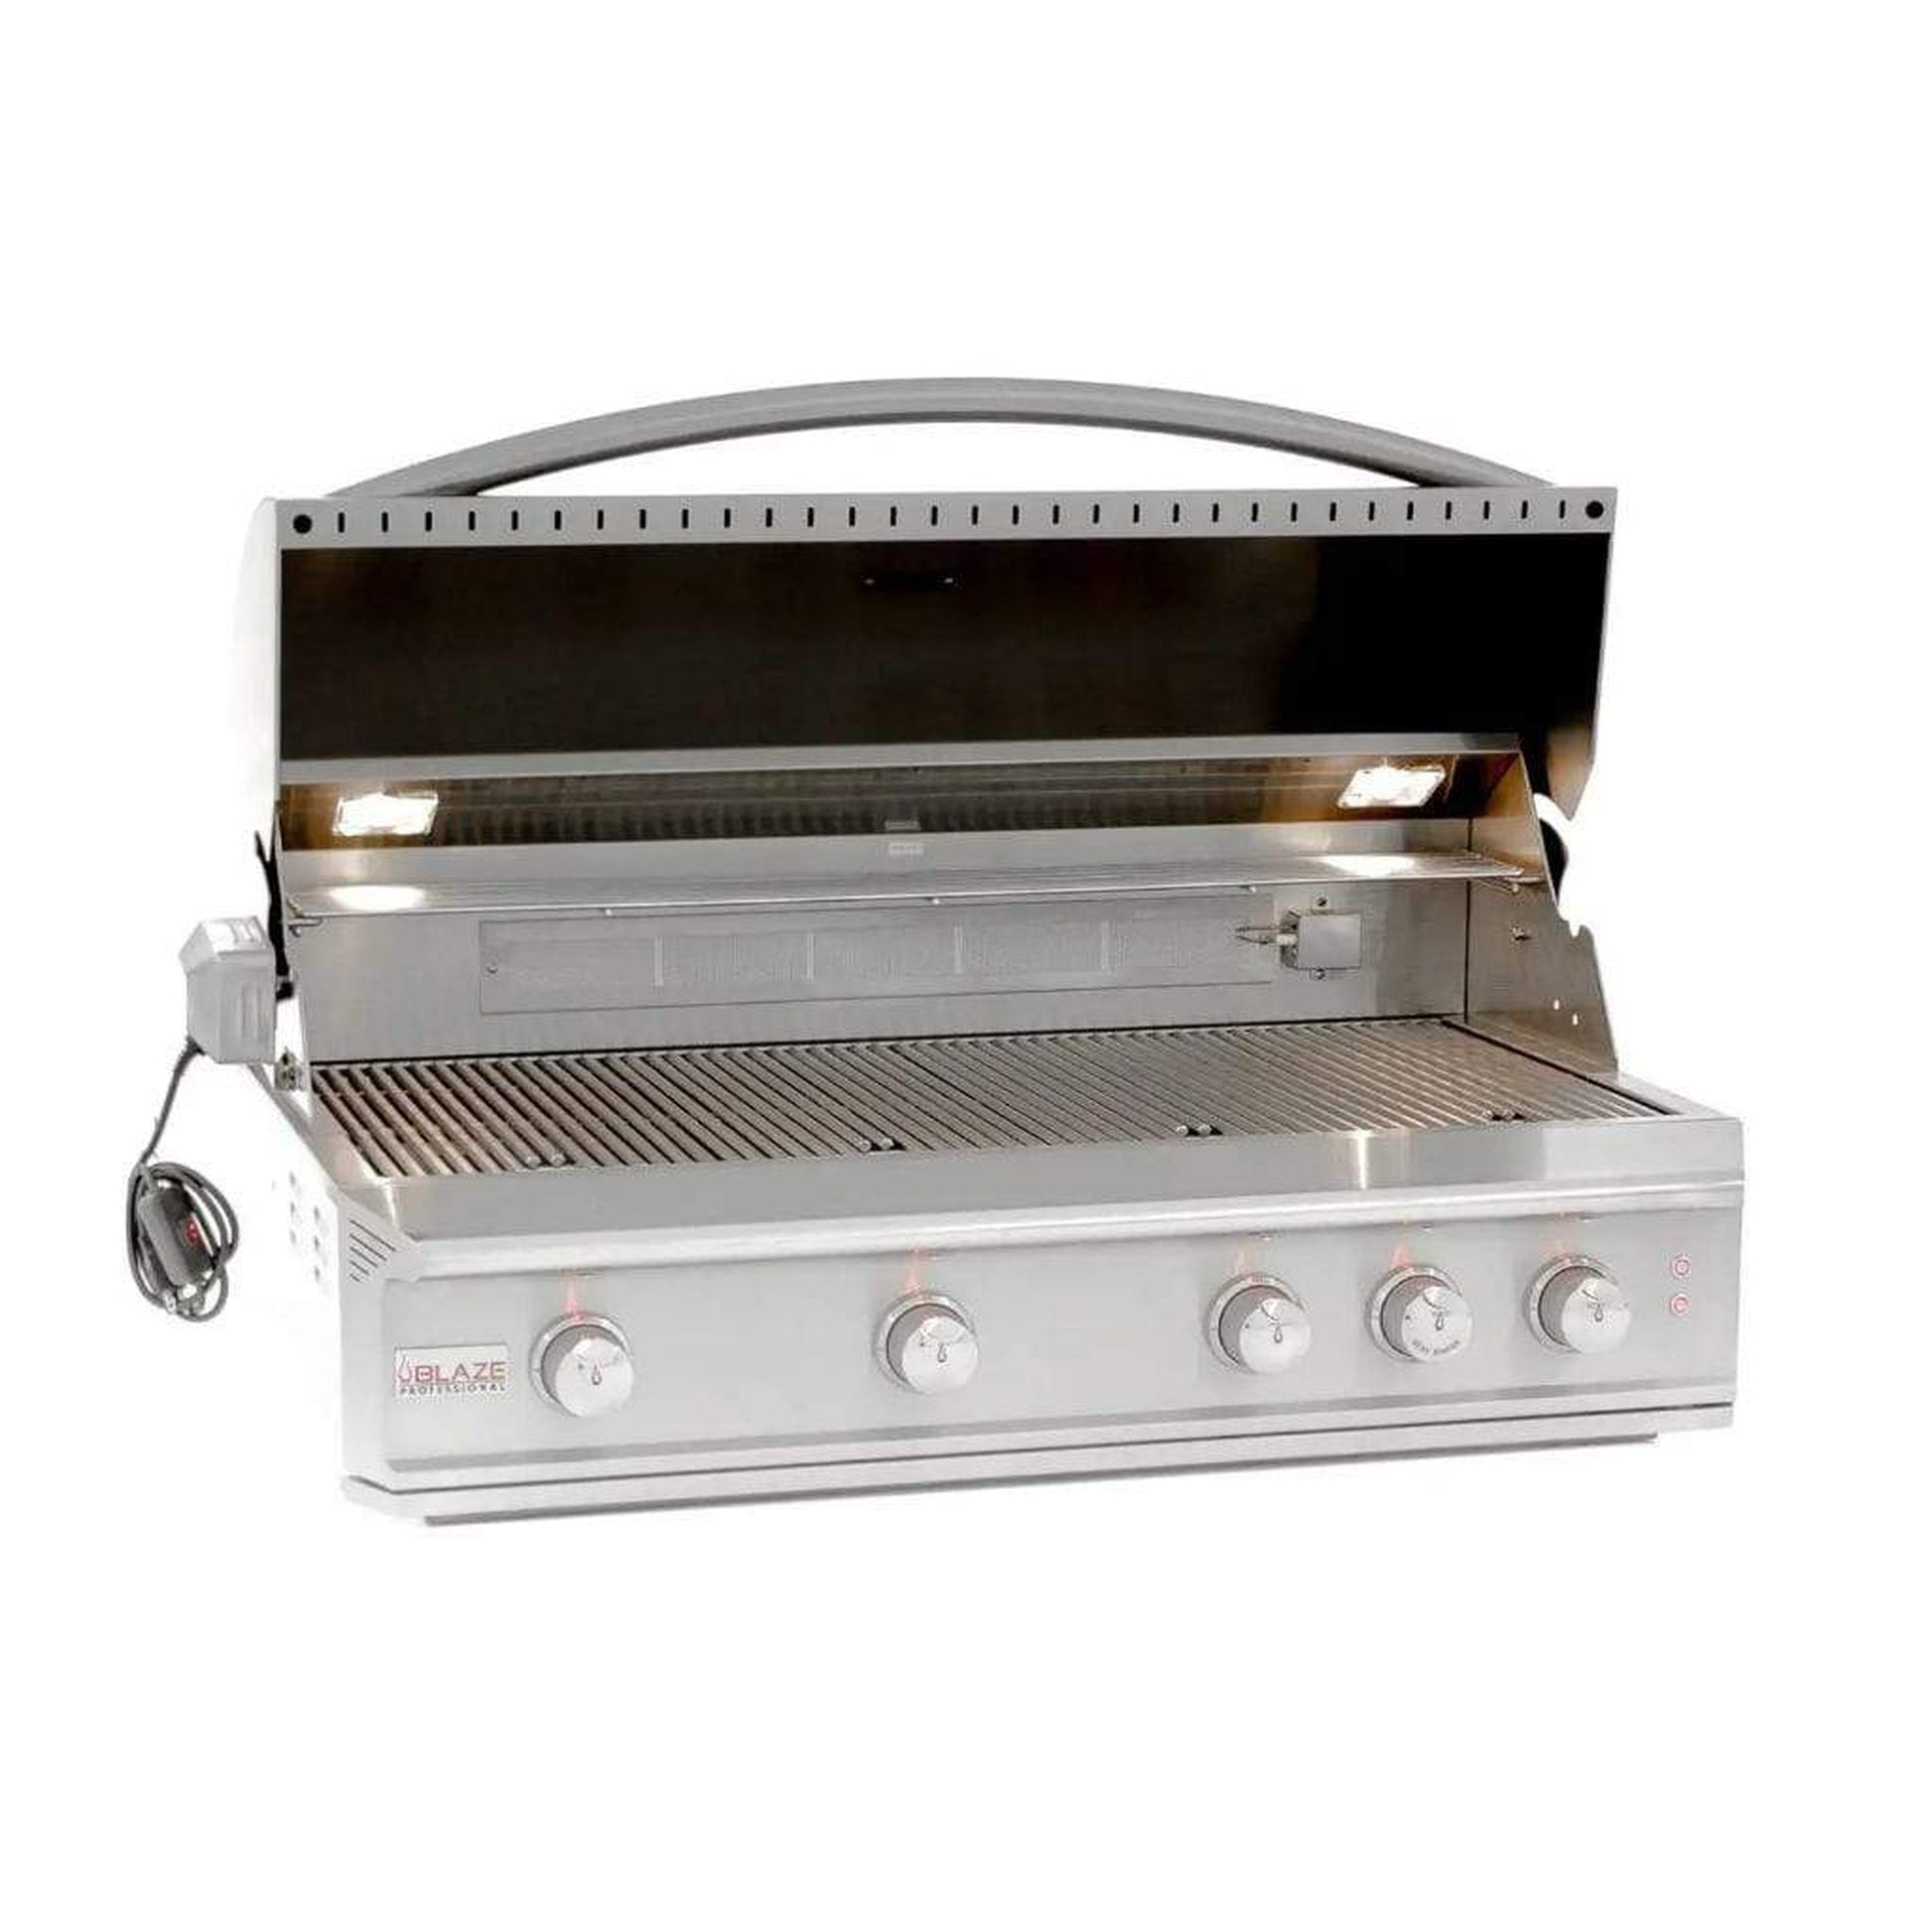 Blaze Professional LUX 44" 4-Burner Built-In Gas Grill with Rear Infrared Burner